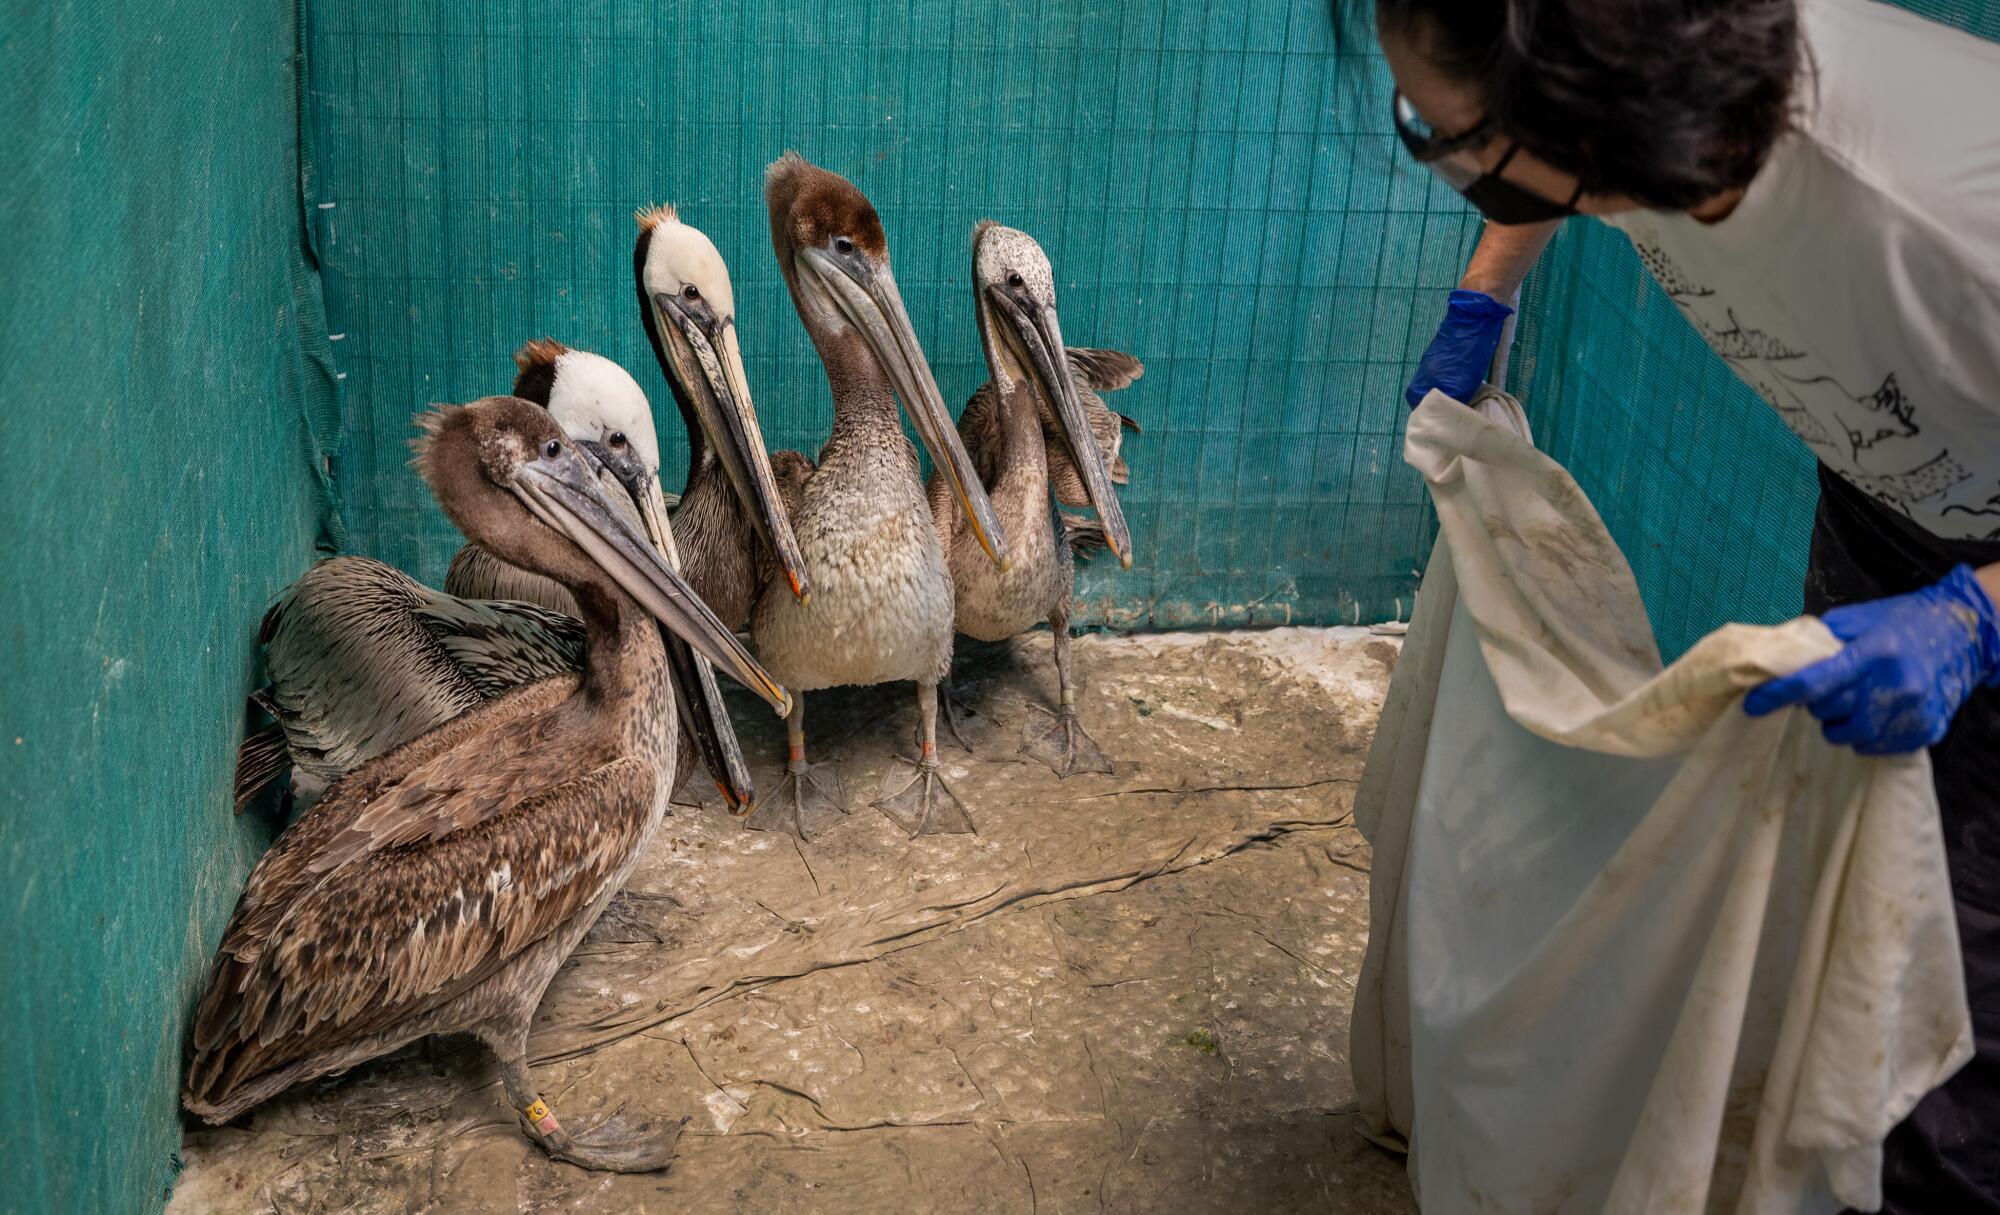 A woman cares for a pen full of sick Brown pelicans at the Wetlands and Wildlife Care Center in Huntington Beach.